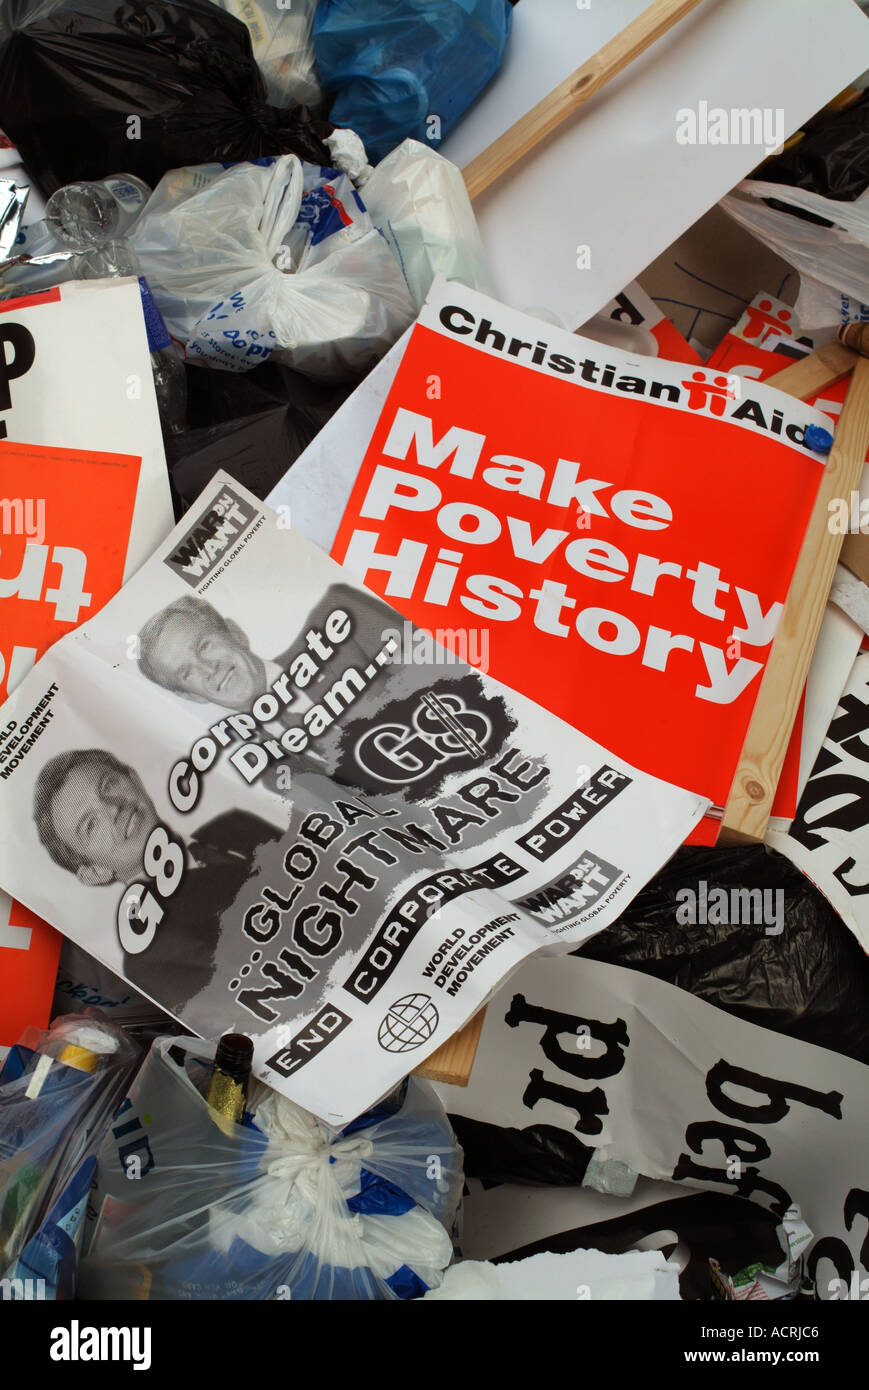 MAKE POVERTY HISTORY placards thrown on to a pile of rubbish at the Meadows, Edinburgh, Scotland, UK. Stock Photo